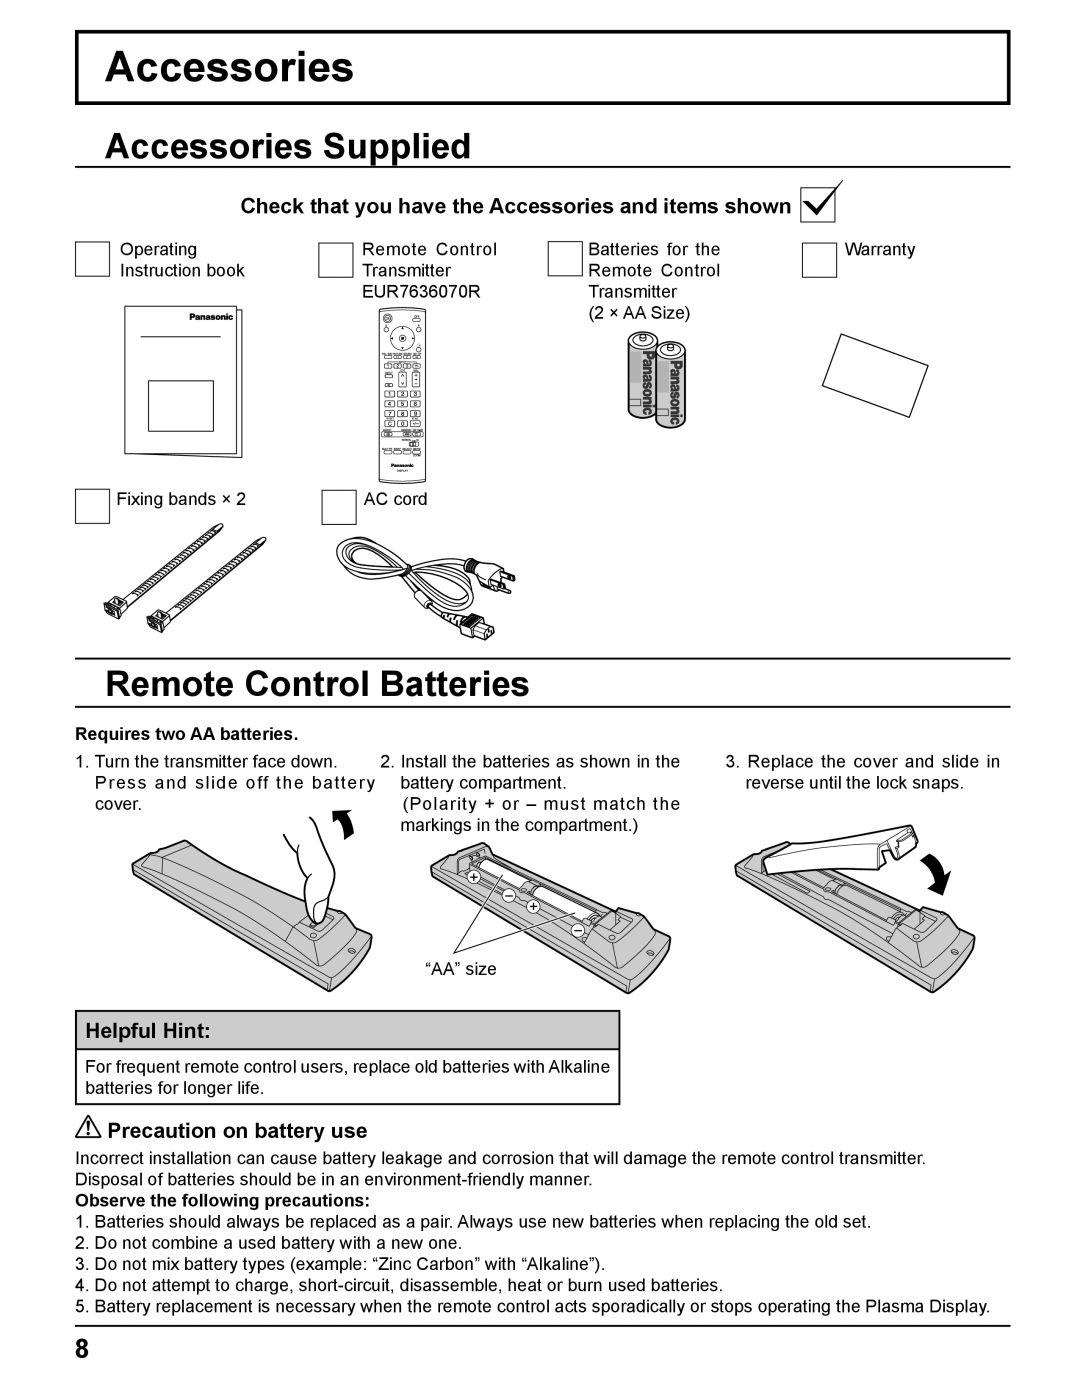 Panasonic TQBC2033 Accessories Supplied, Remote Control Batteries, Check that you have the Accessories and items shown 